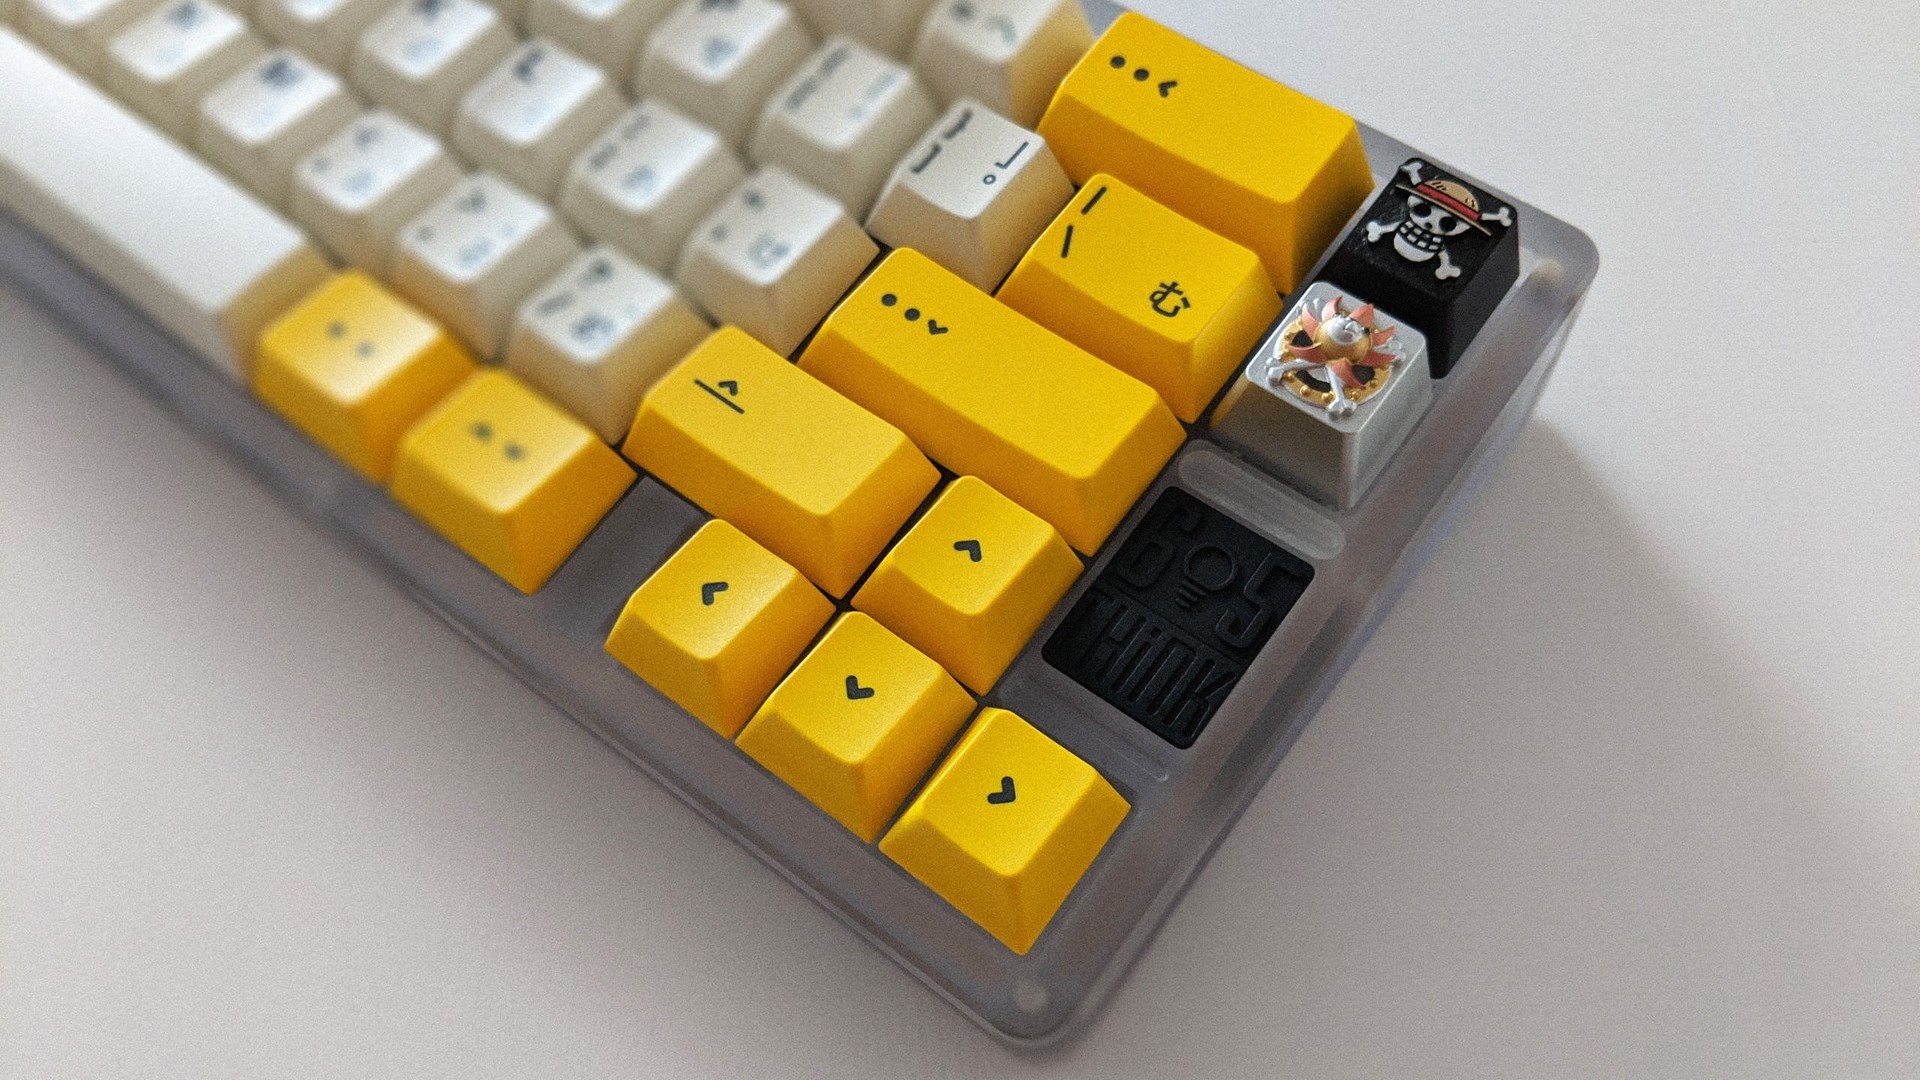 GMK Serika with One Piece metal keycaps on polycarbonate Think 6.5 keyboard